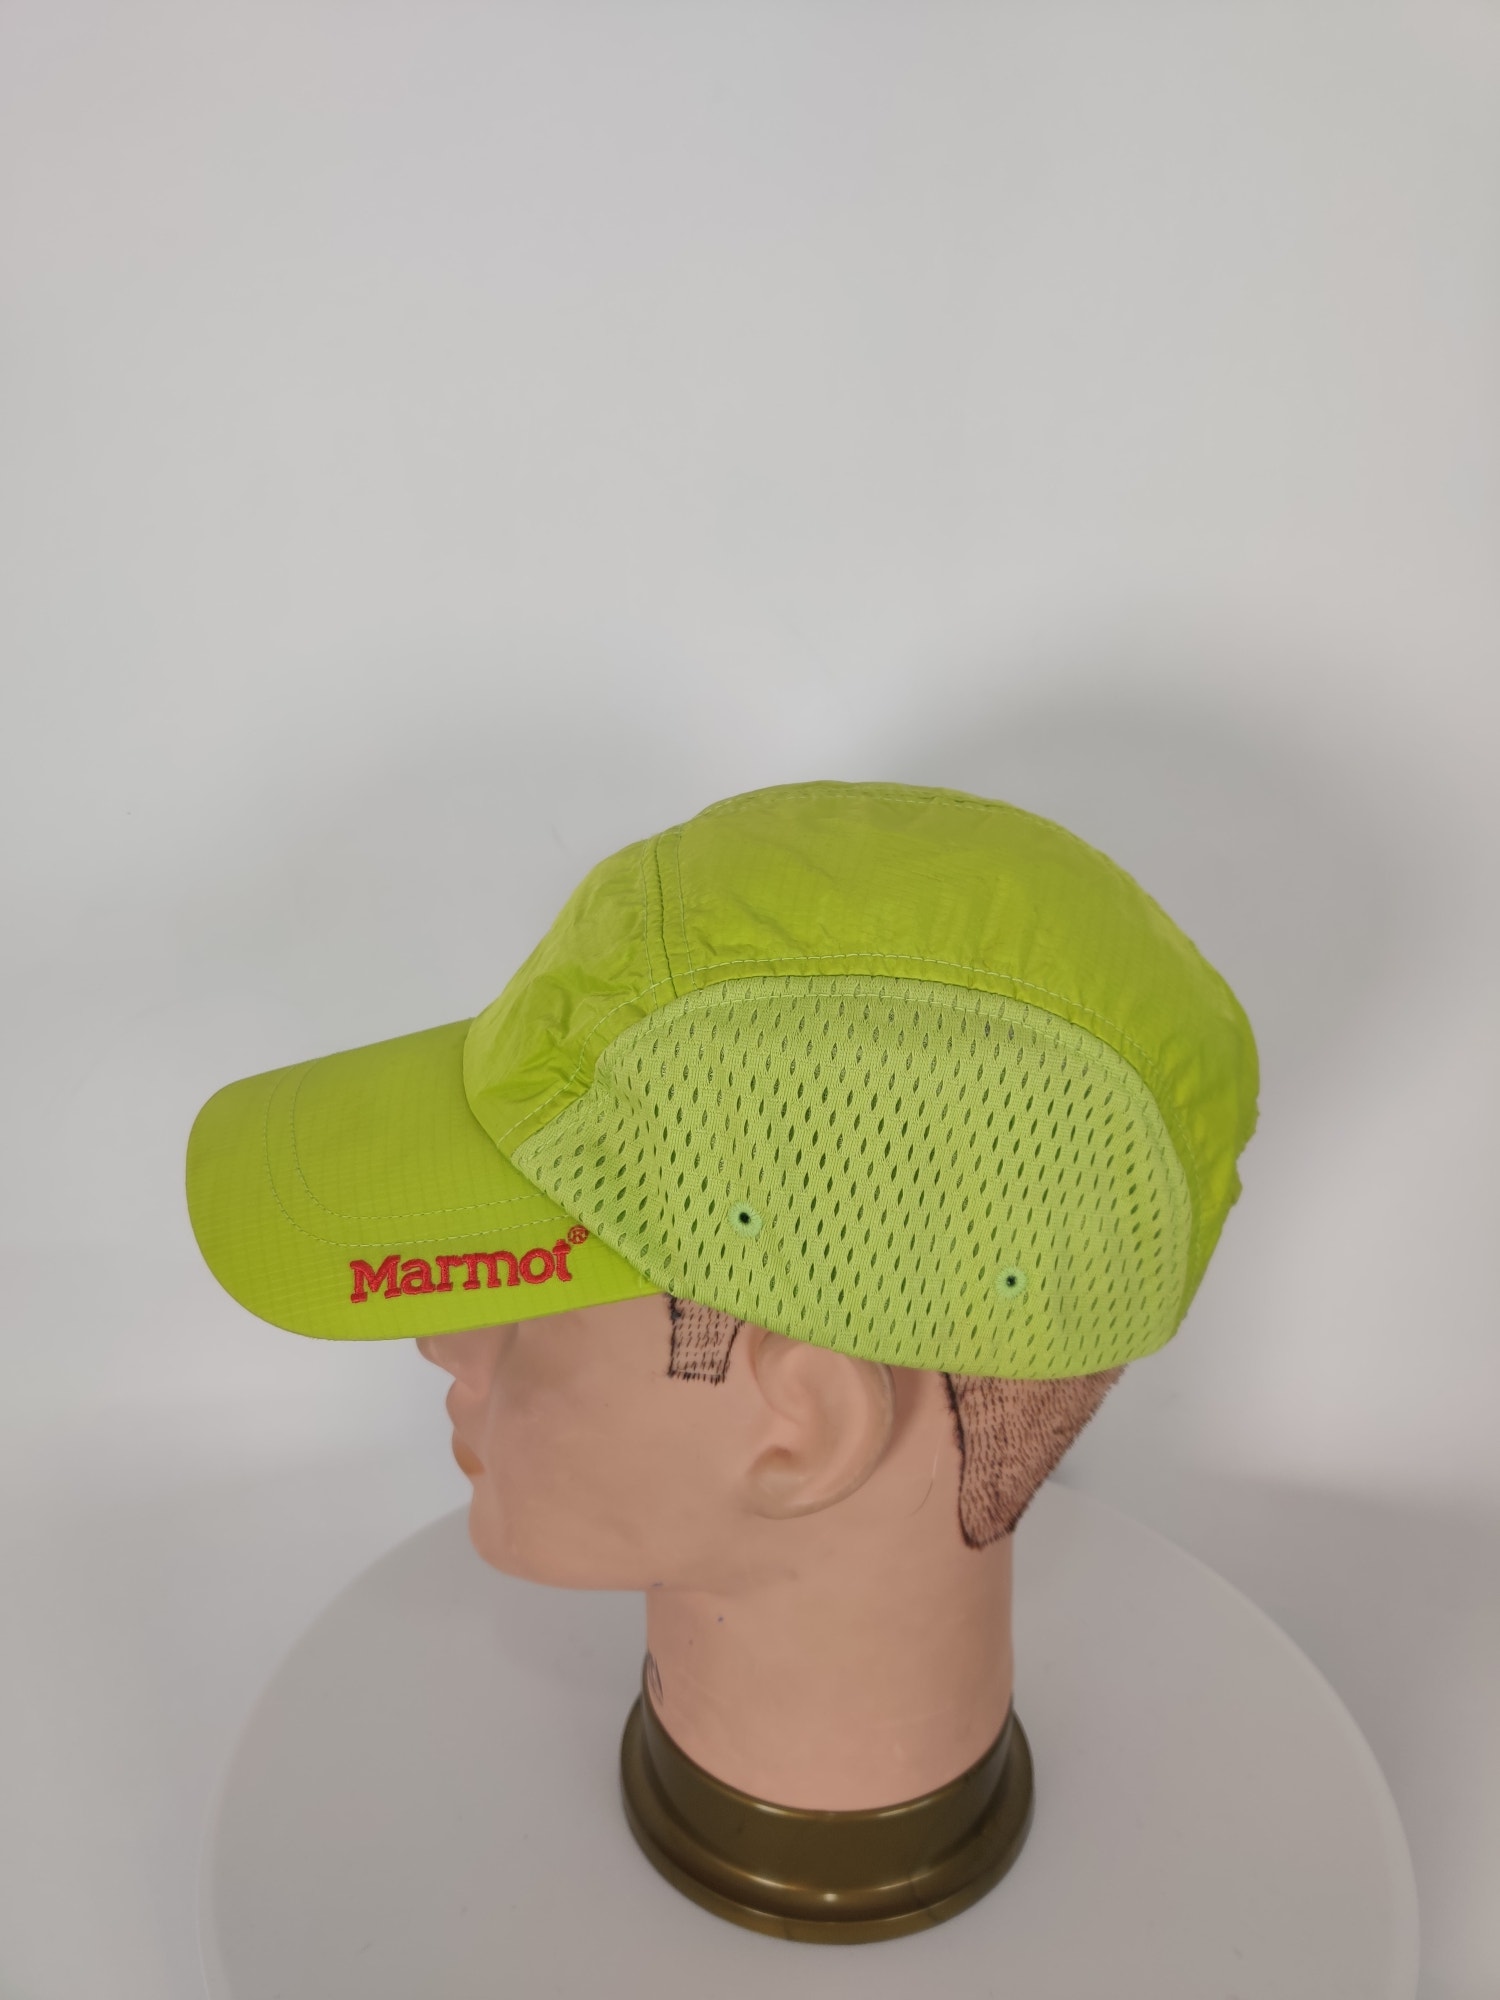 (V) Marmot Unisex cycling hat hiking casual lightweight adjustable green OS  - Picture 4 of 8